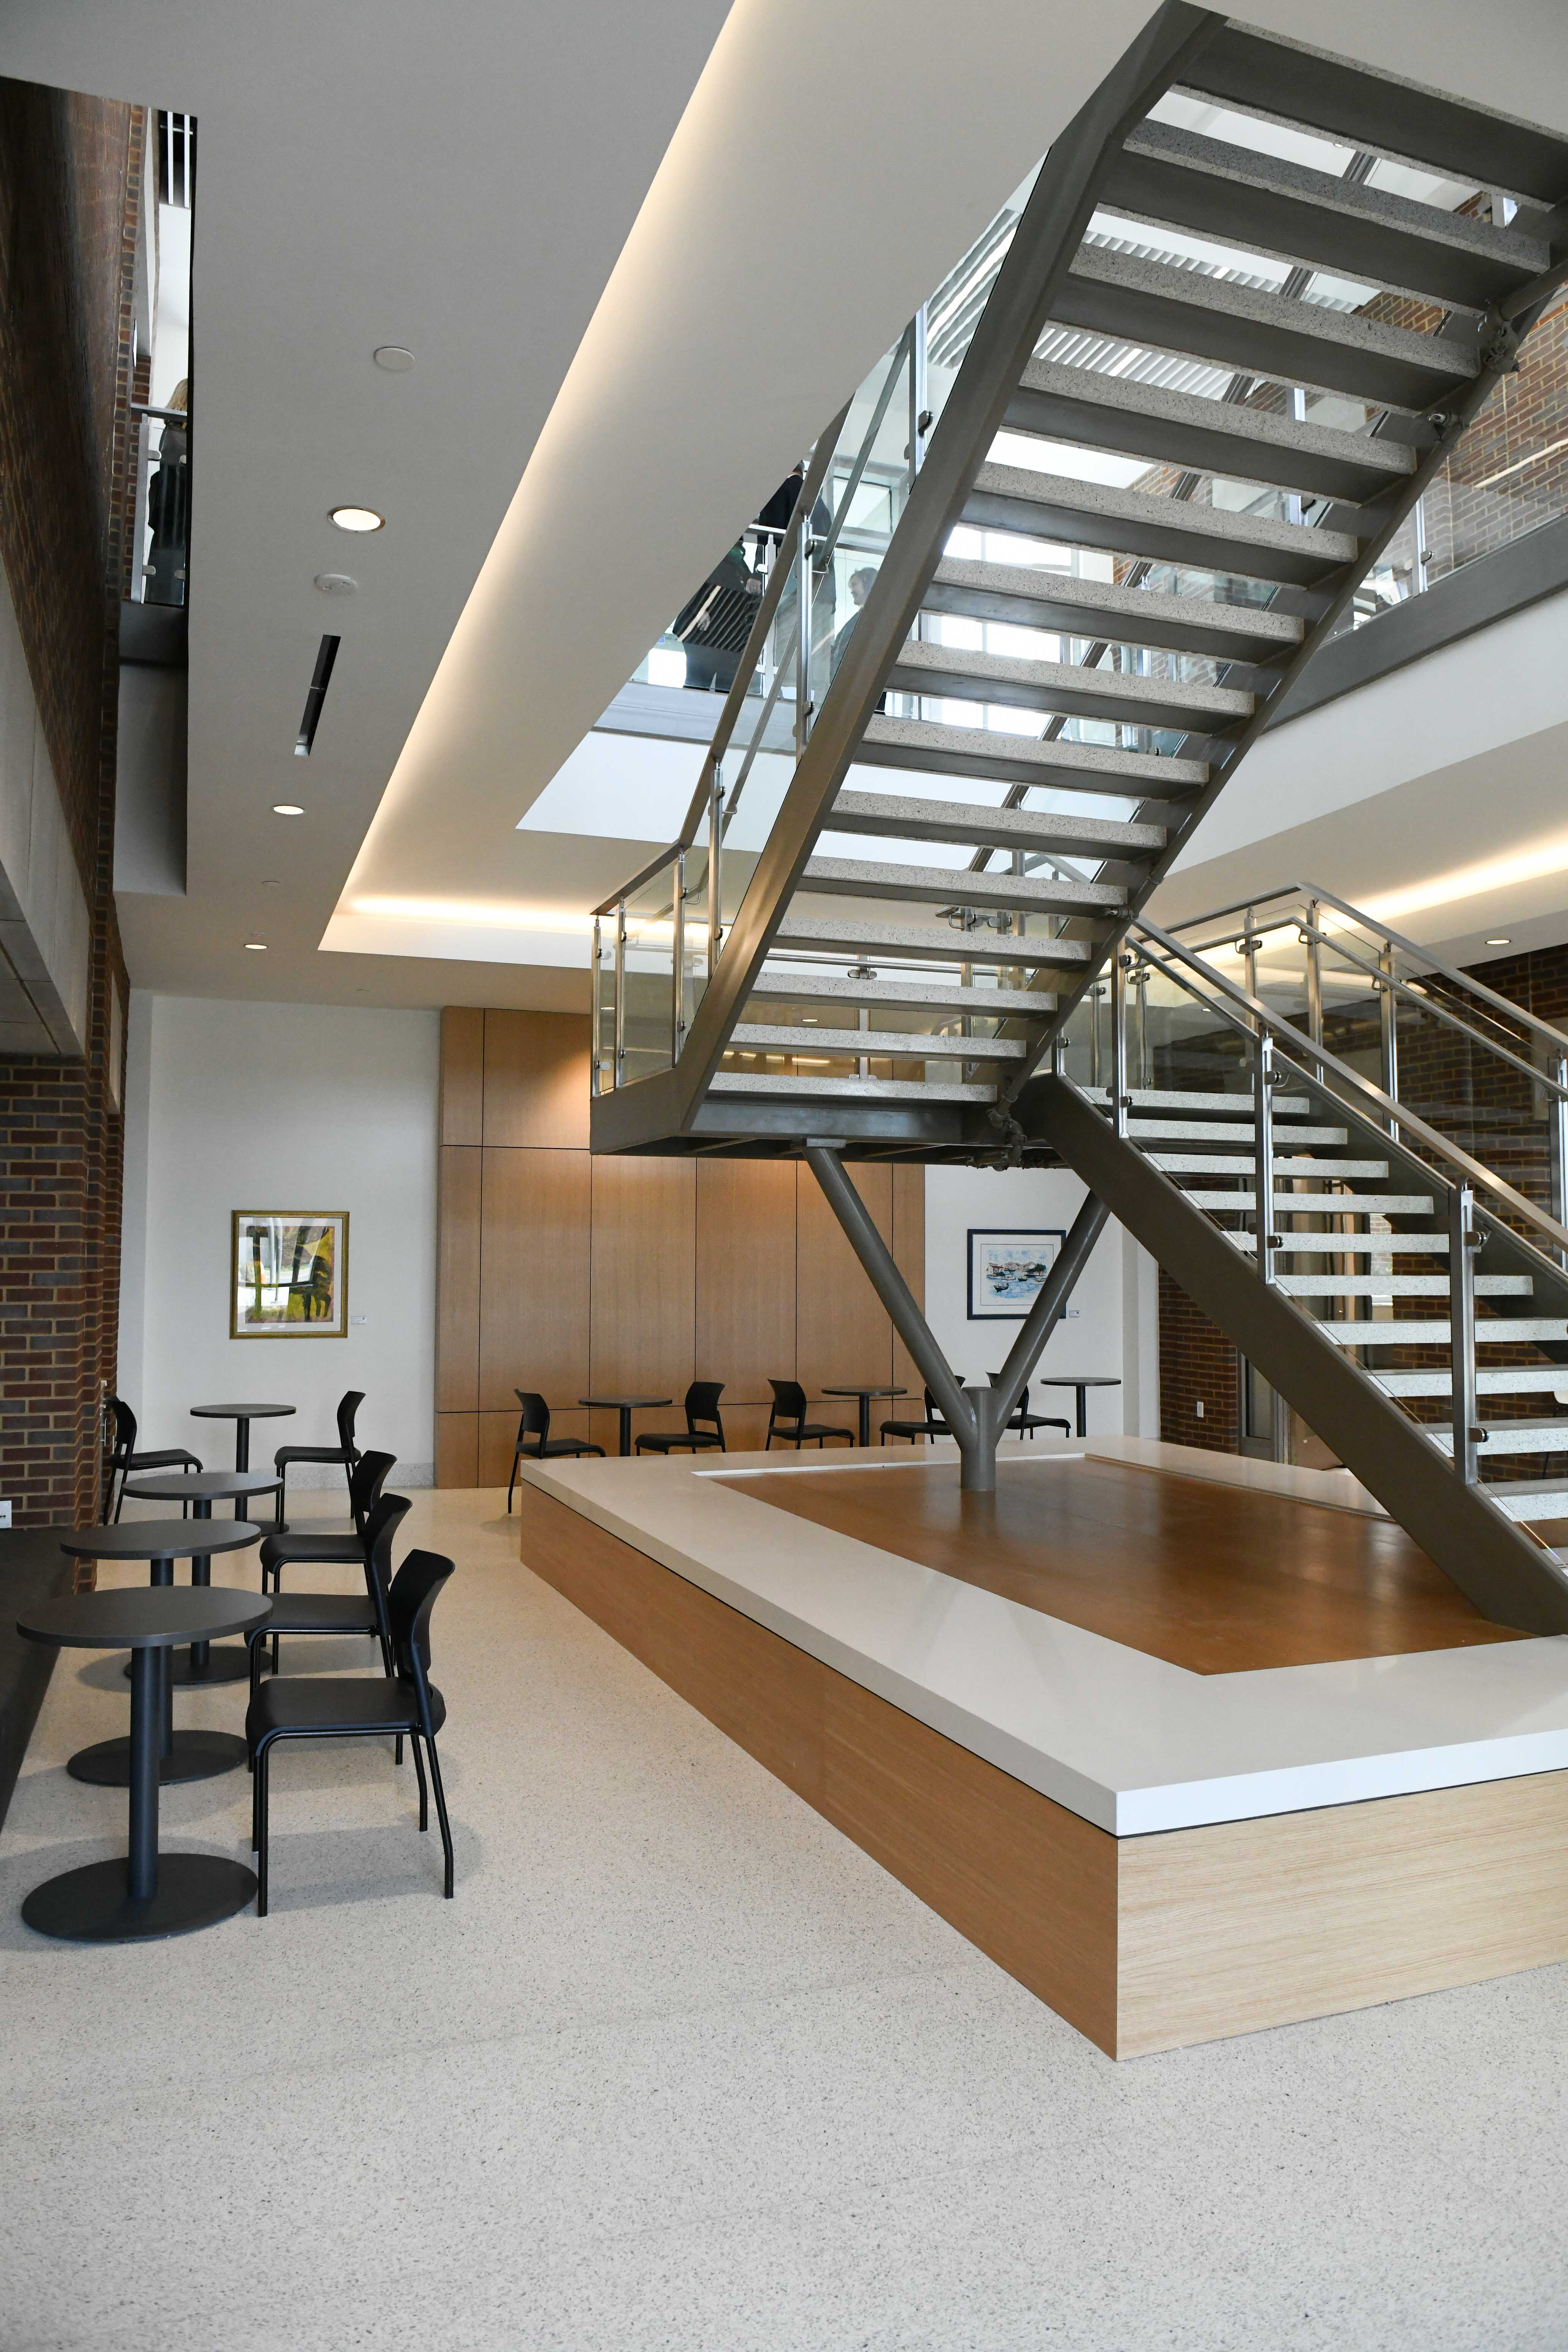 A look inside of Columbia State’s new arts and technology building on the Williamson Campus.